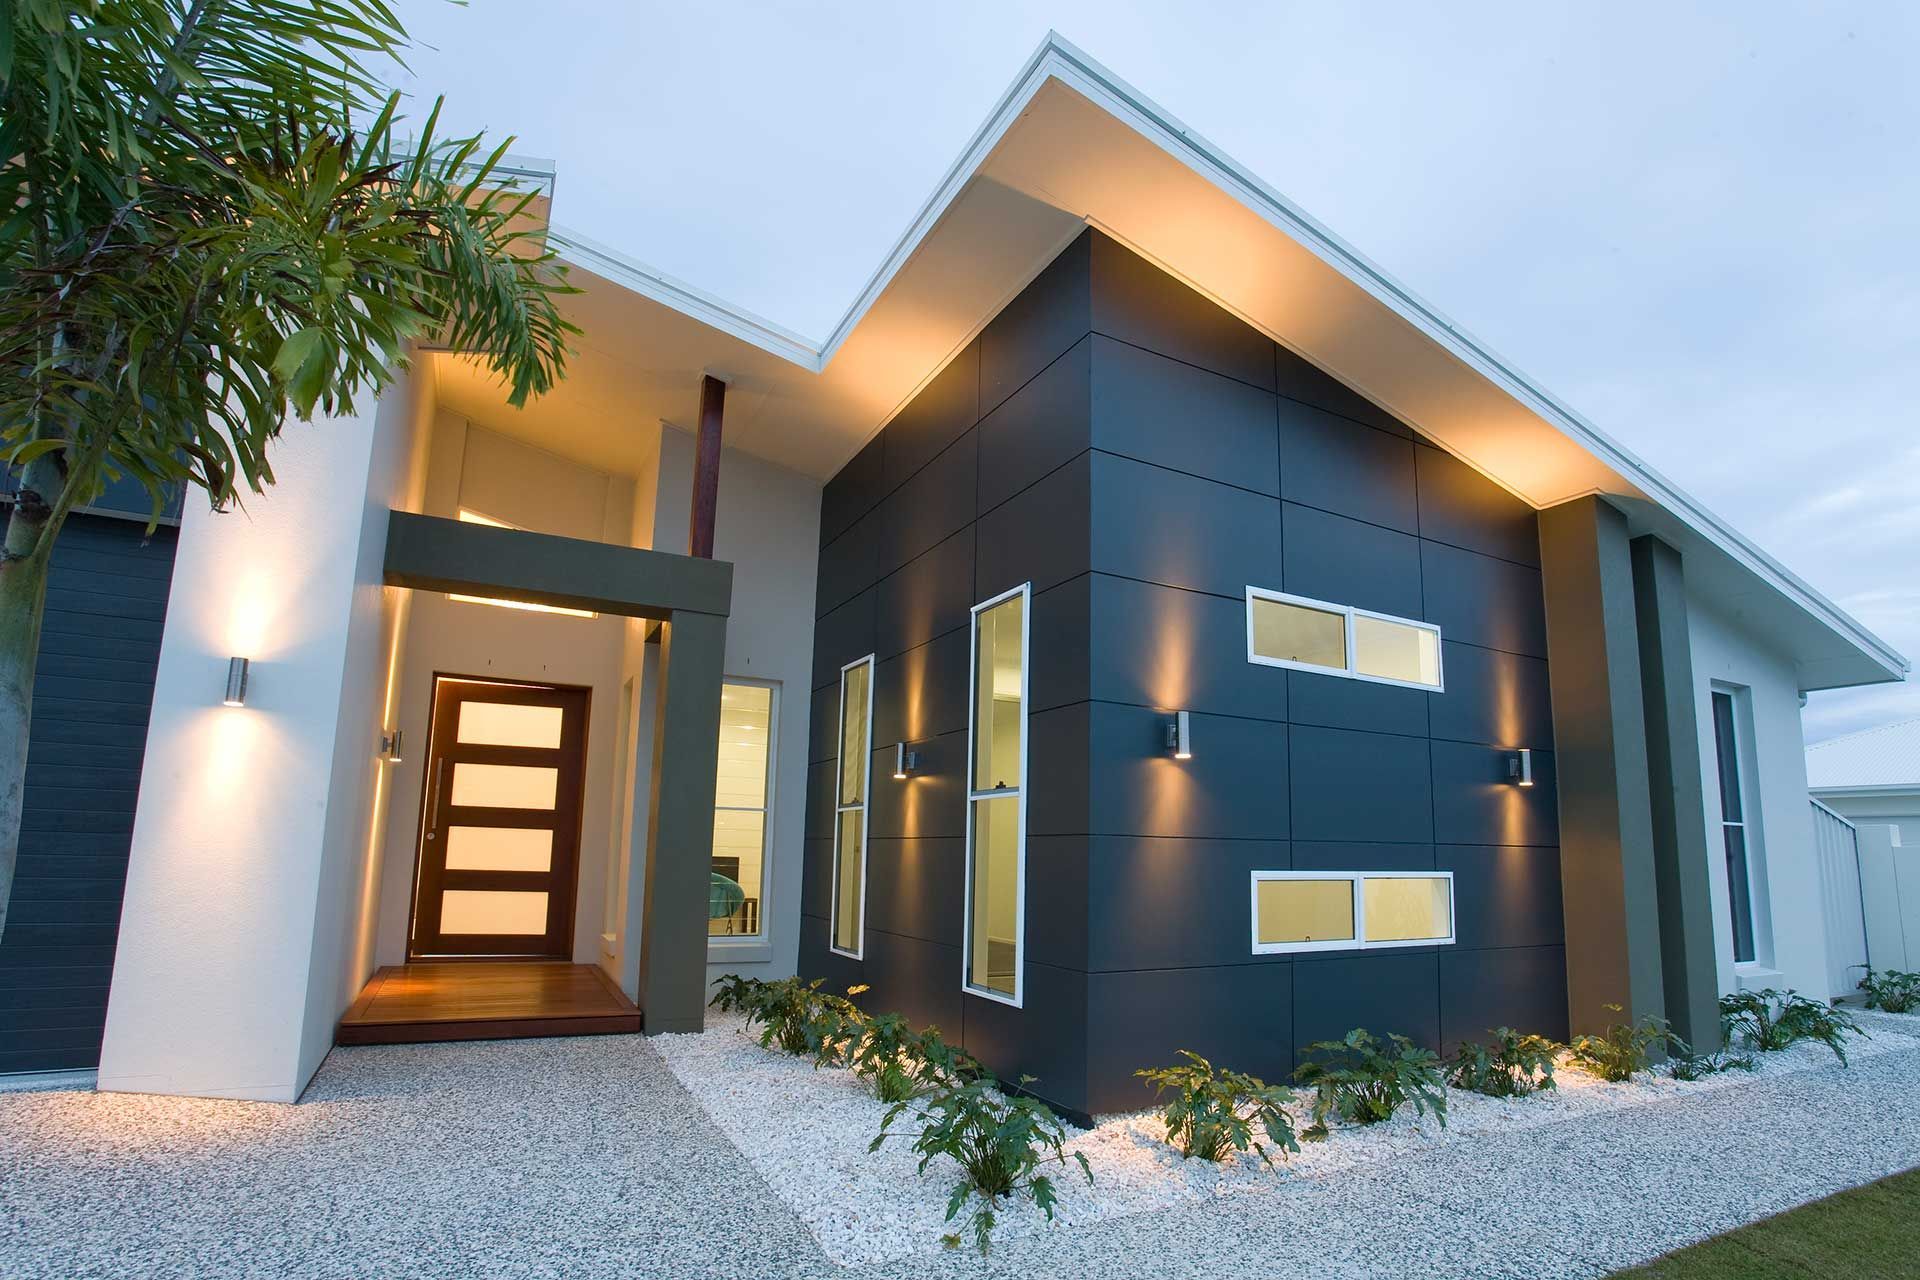 Print Design of a House-Hervey Bay, QLD - Wide Bay Design Drafting